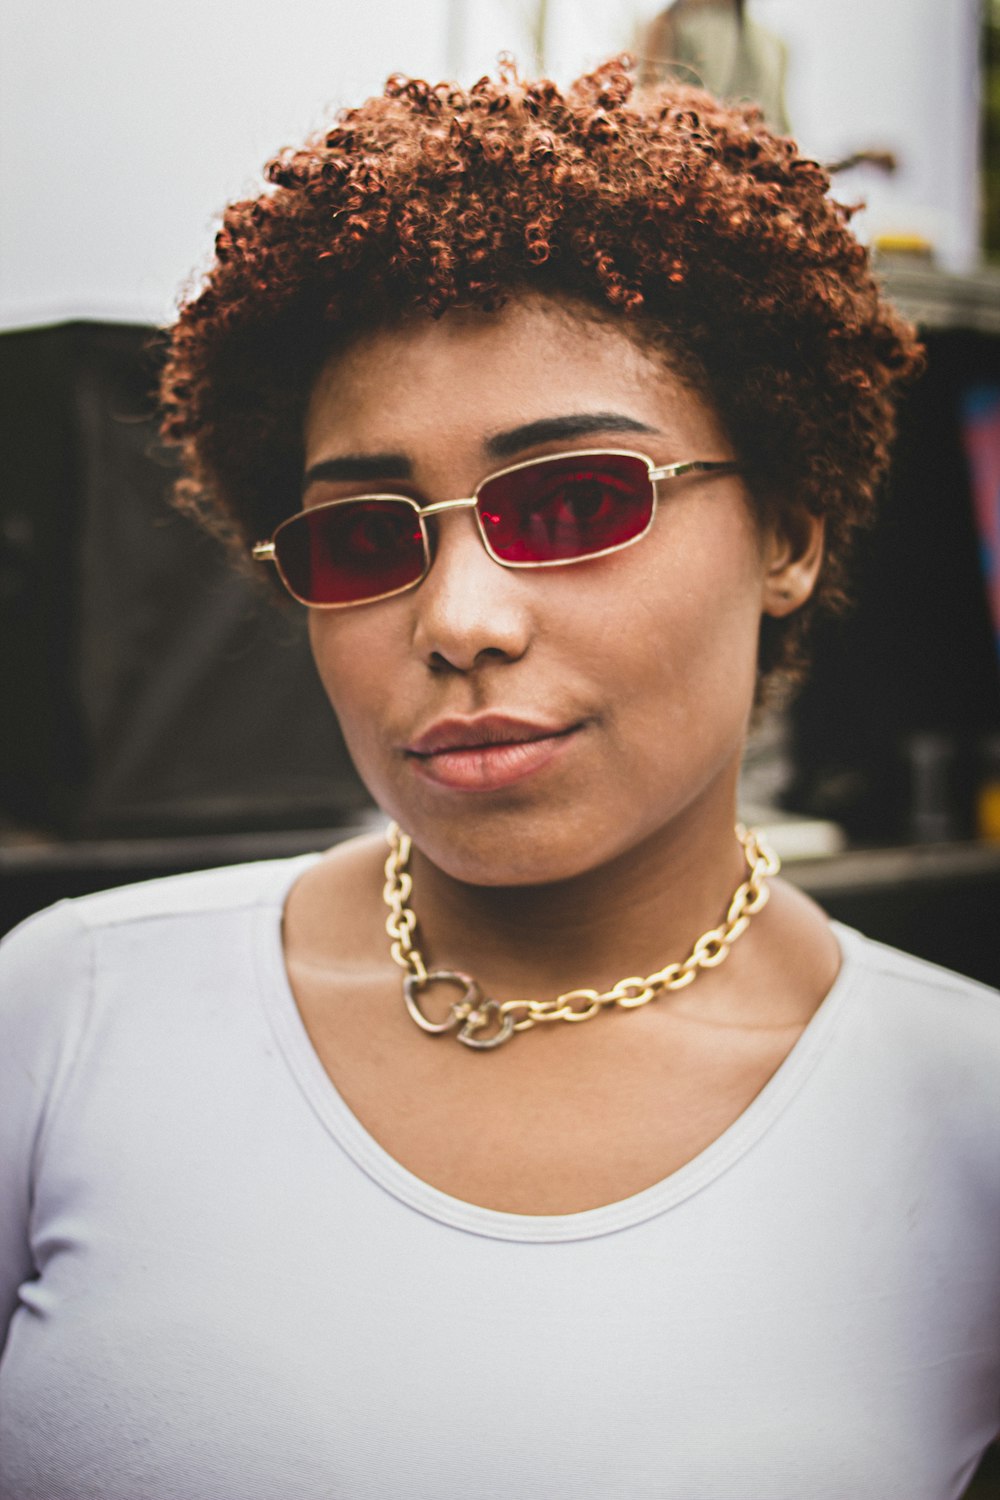 a woman wearing sunglasses and a necklace